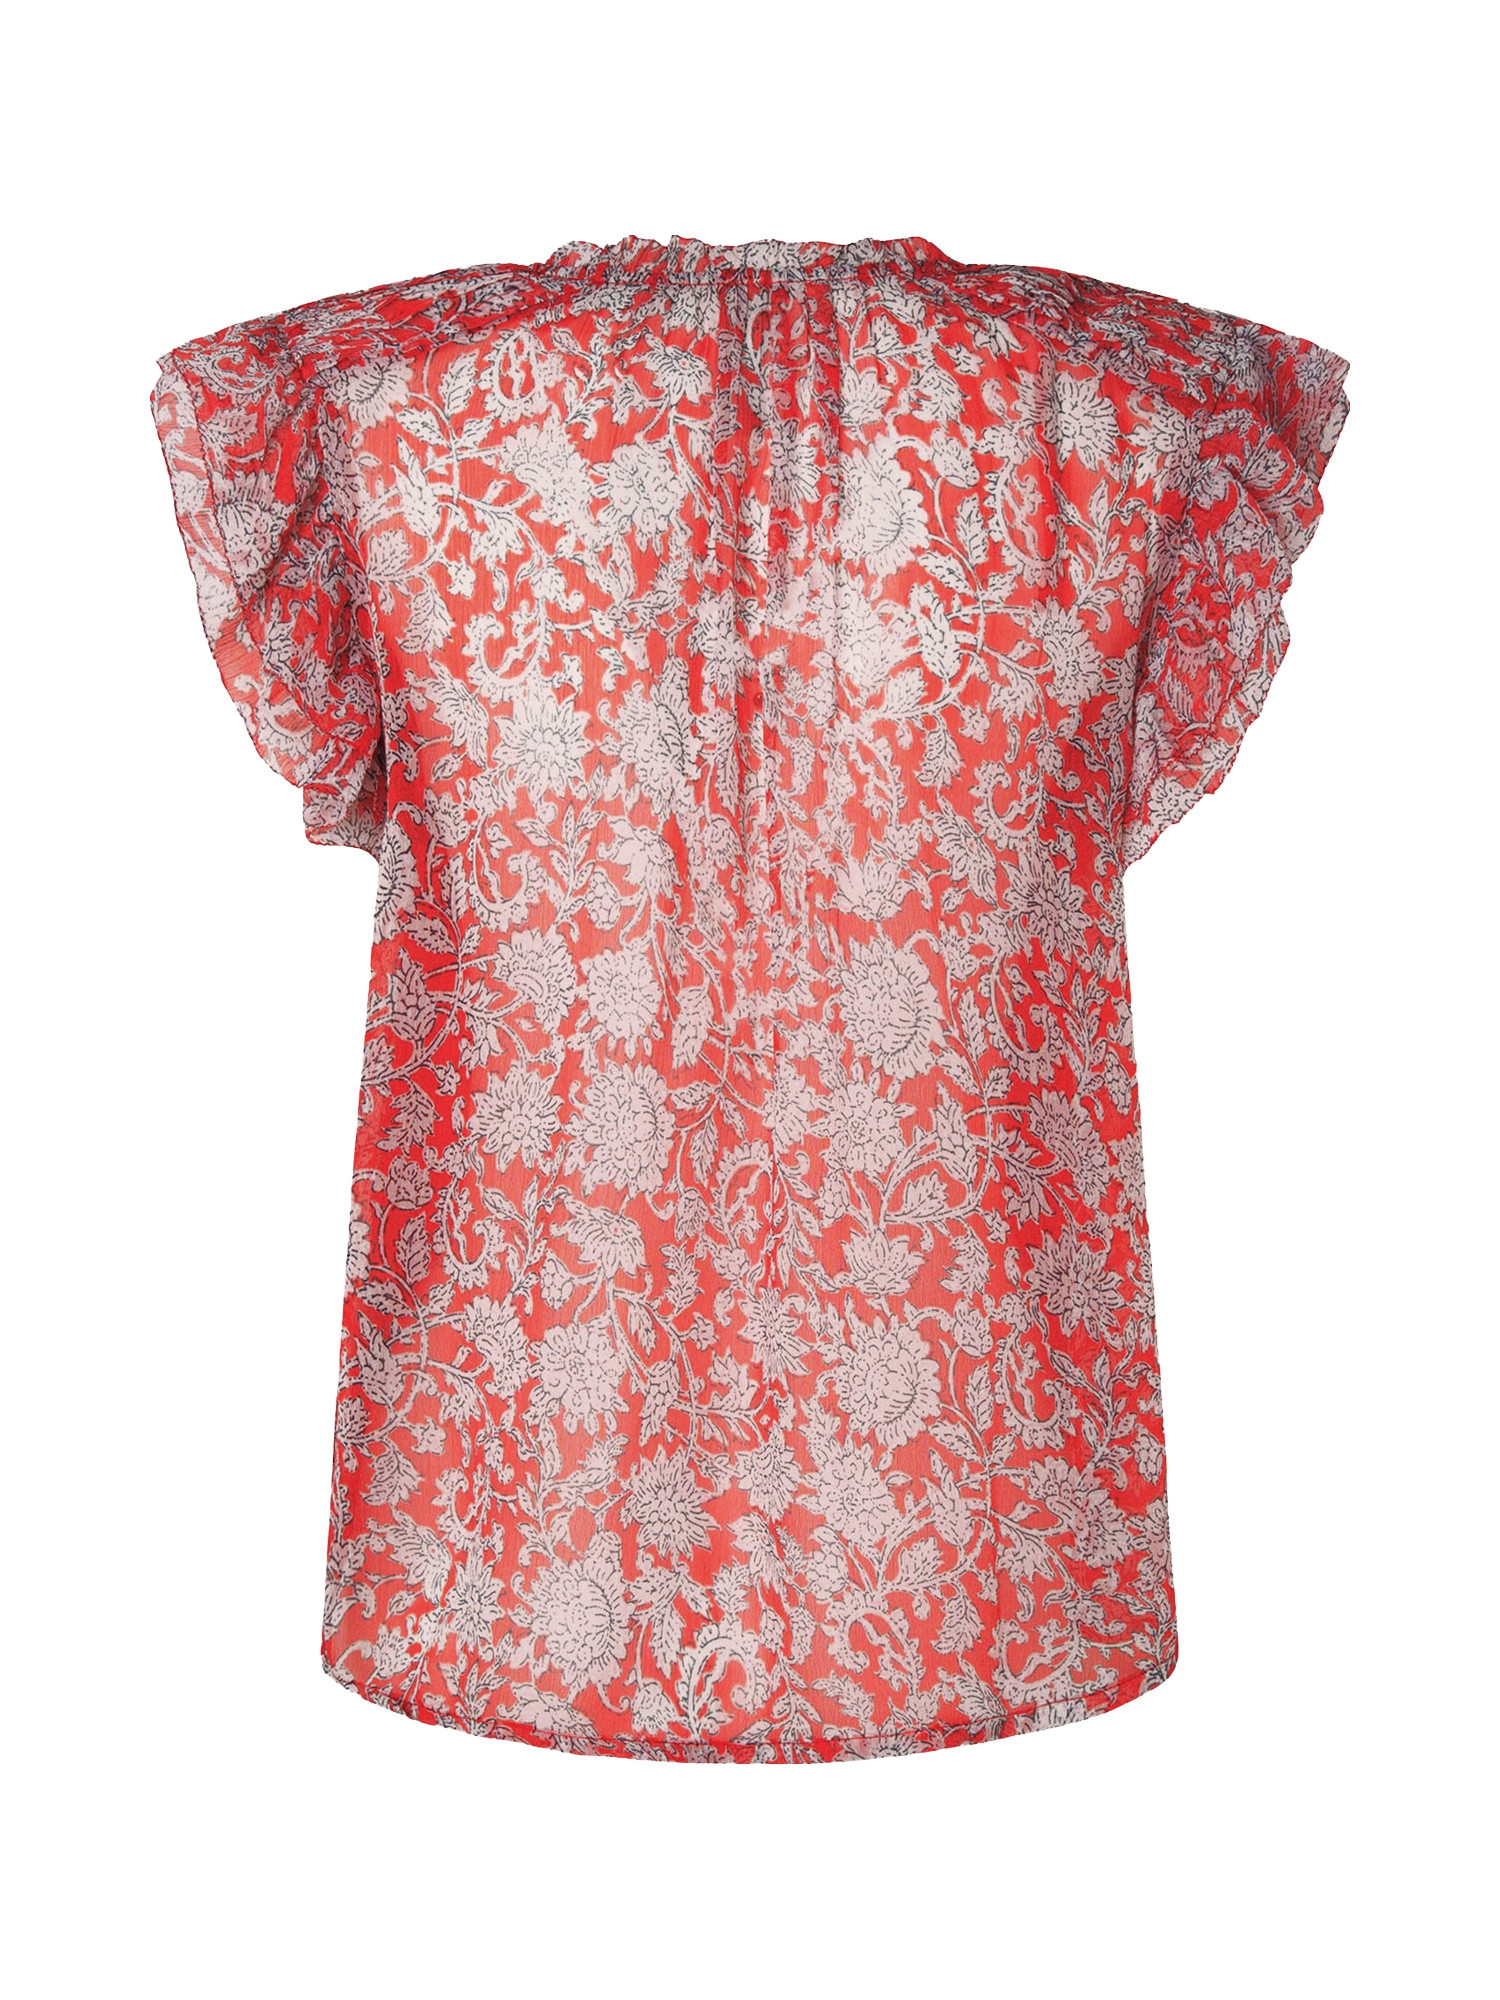 Pepe Jeans - Patterned top, Red, large image number 1